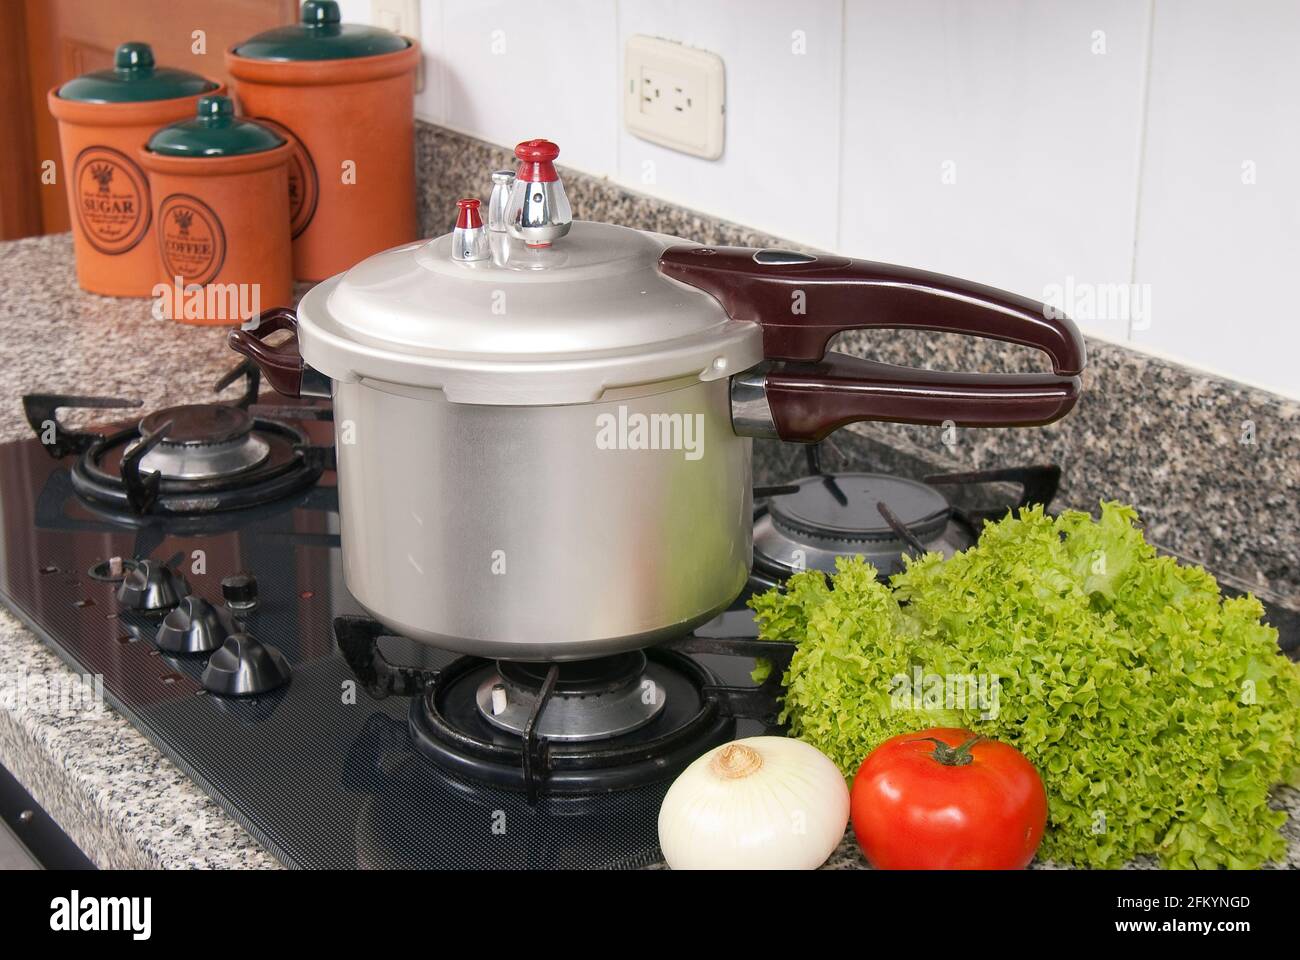 Pressure cooker; photo about stove in the kitchen. Stock Photo